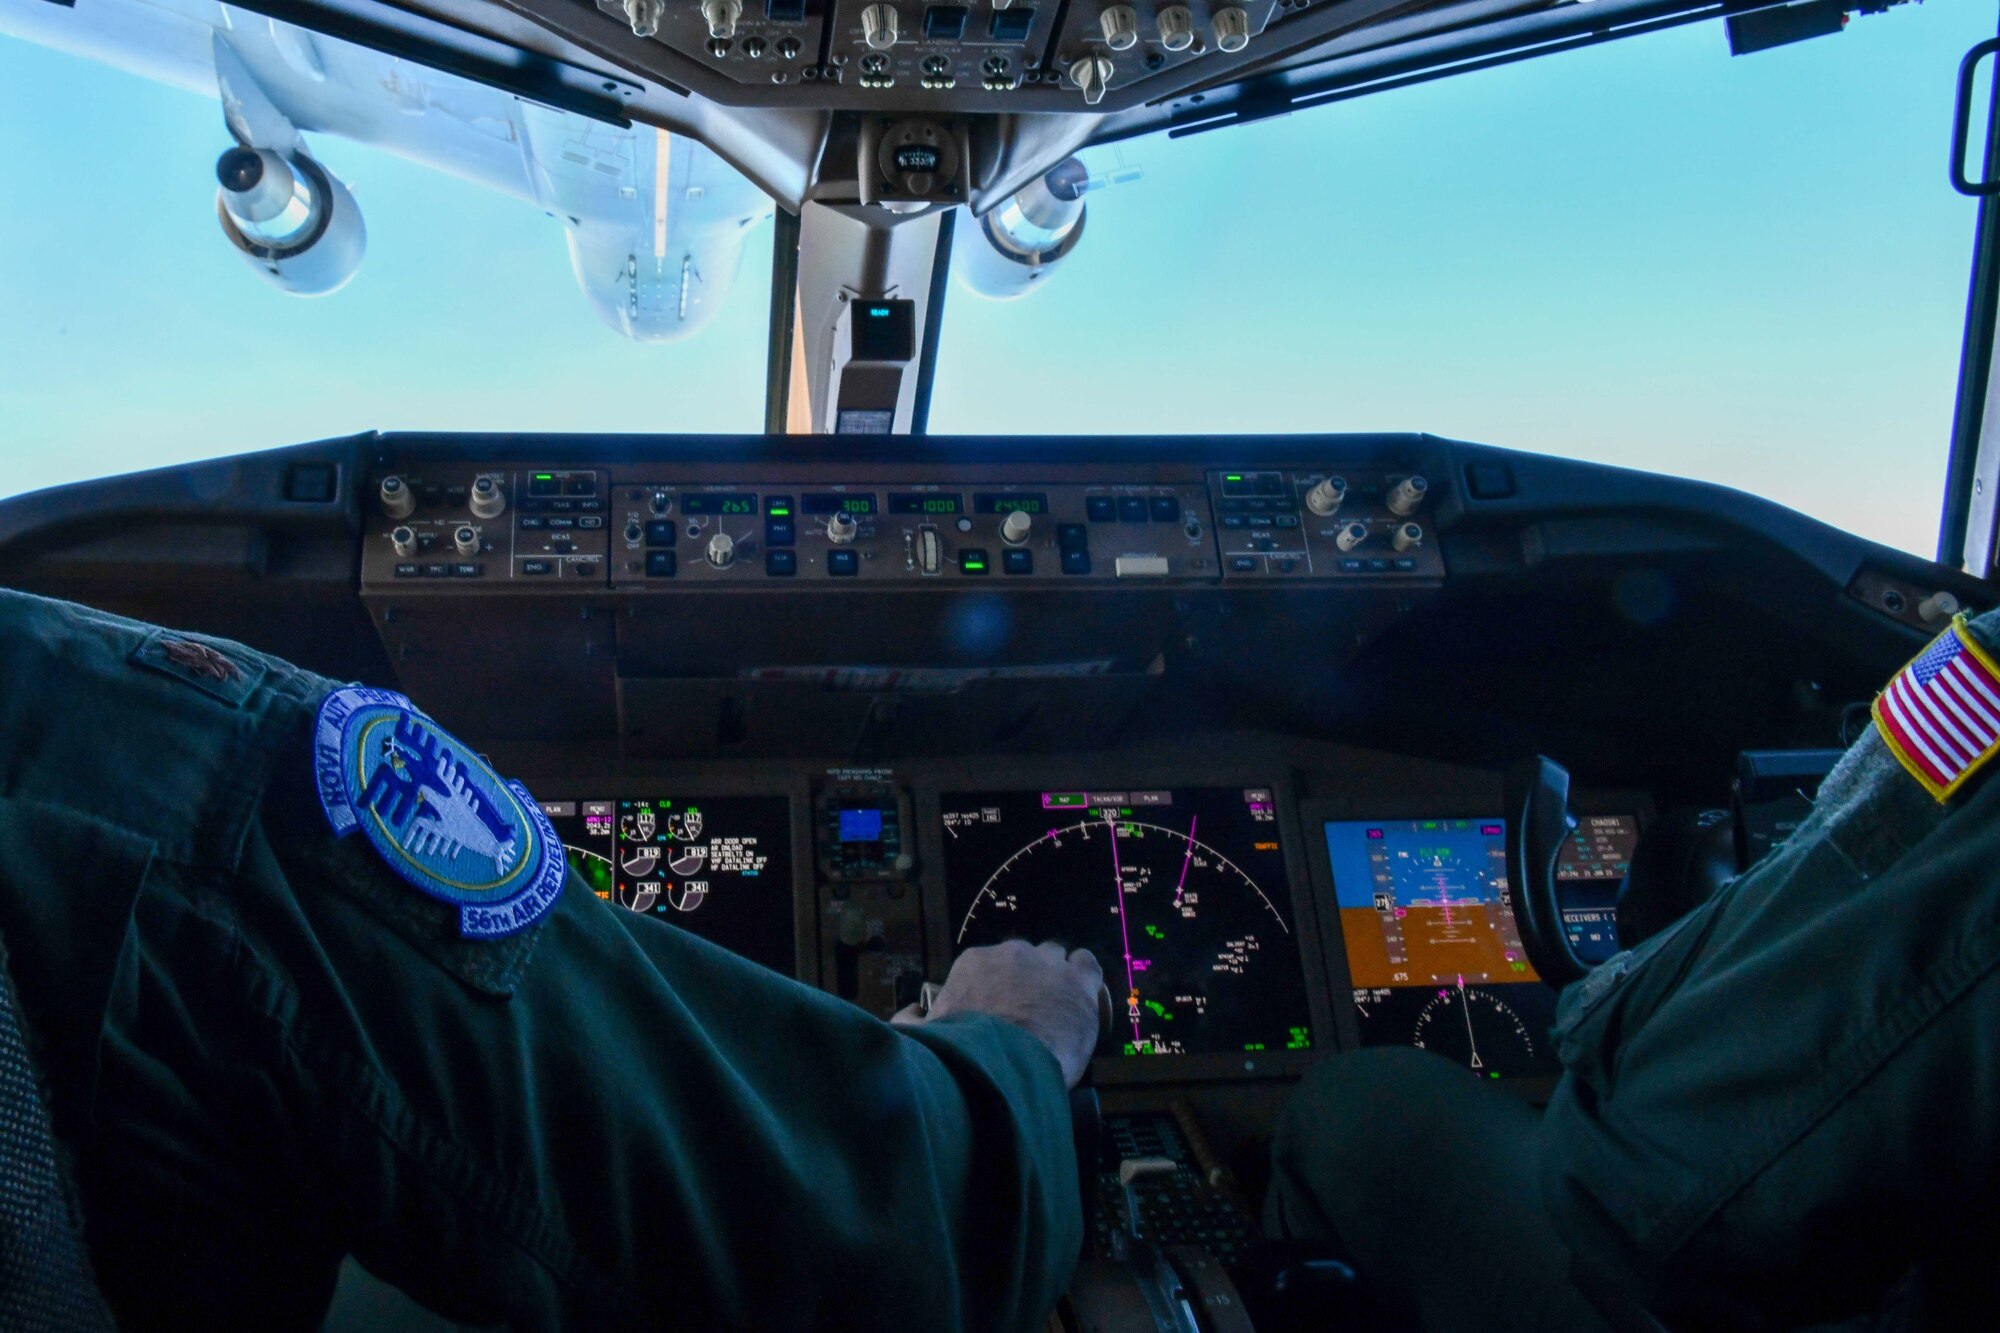 U.S. Air Force Maj. Phillip Wilkerson (left)  and Capt. Geoffrey Holscher (right) 56th Air Refueling Squadron, initial development cadres, position a KC-46 Pegasus from Altus Air Force Bas(AFB), Oklahoma, to receive air refueling from another KC-46 while en route to Travis AFB, Calif., Jan. 21, 2023. The pilots participated in upgrade training in which they guided each other through different flying techniques. (U.S. Air Force photo by Airman 1st Class Miyah Gray)